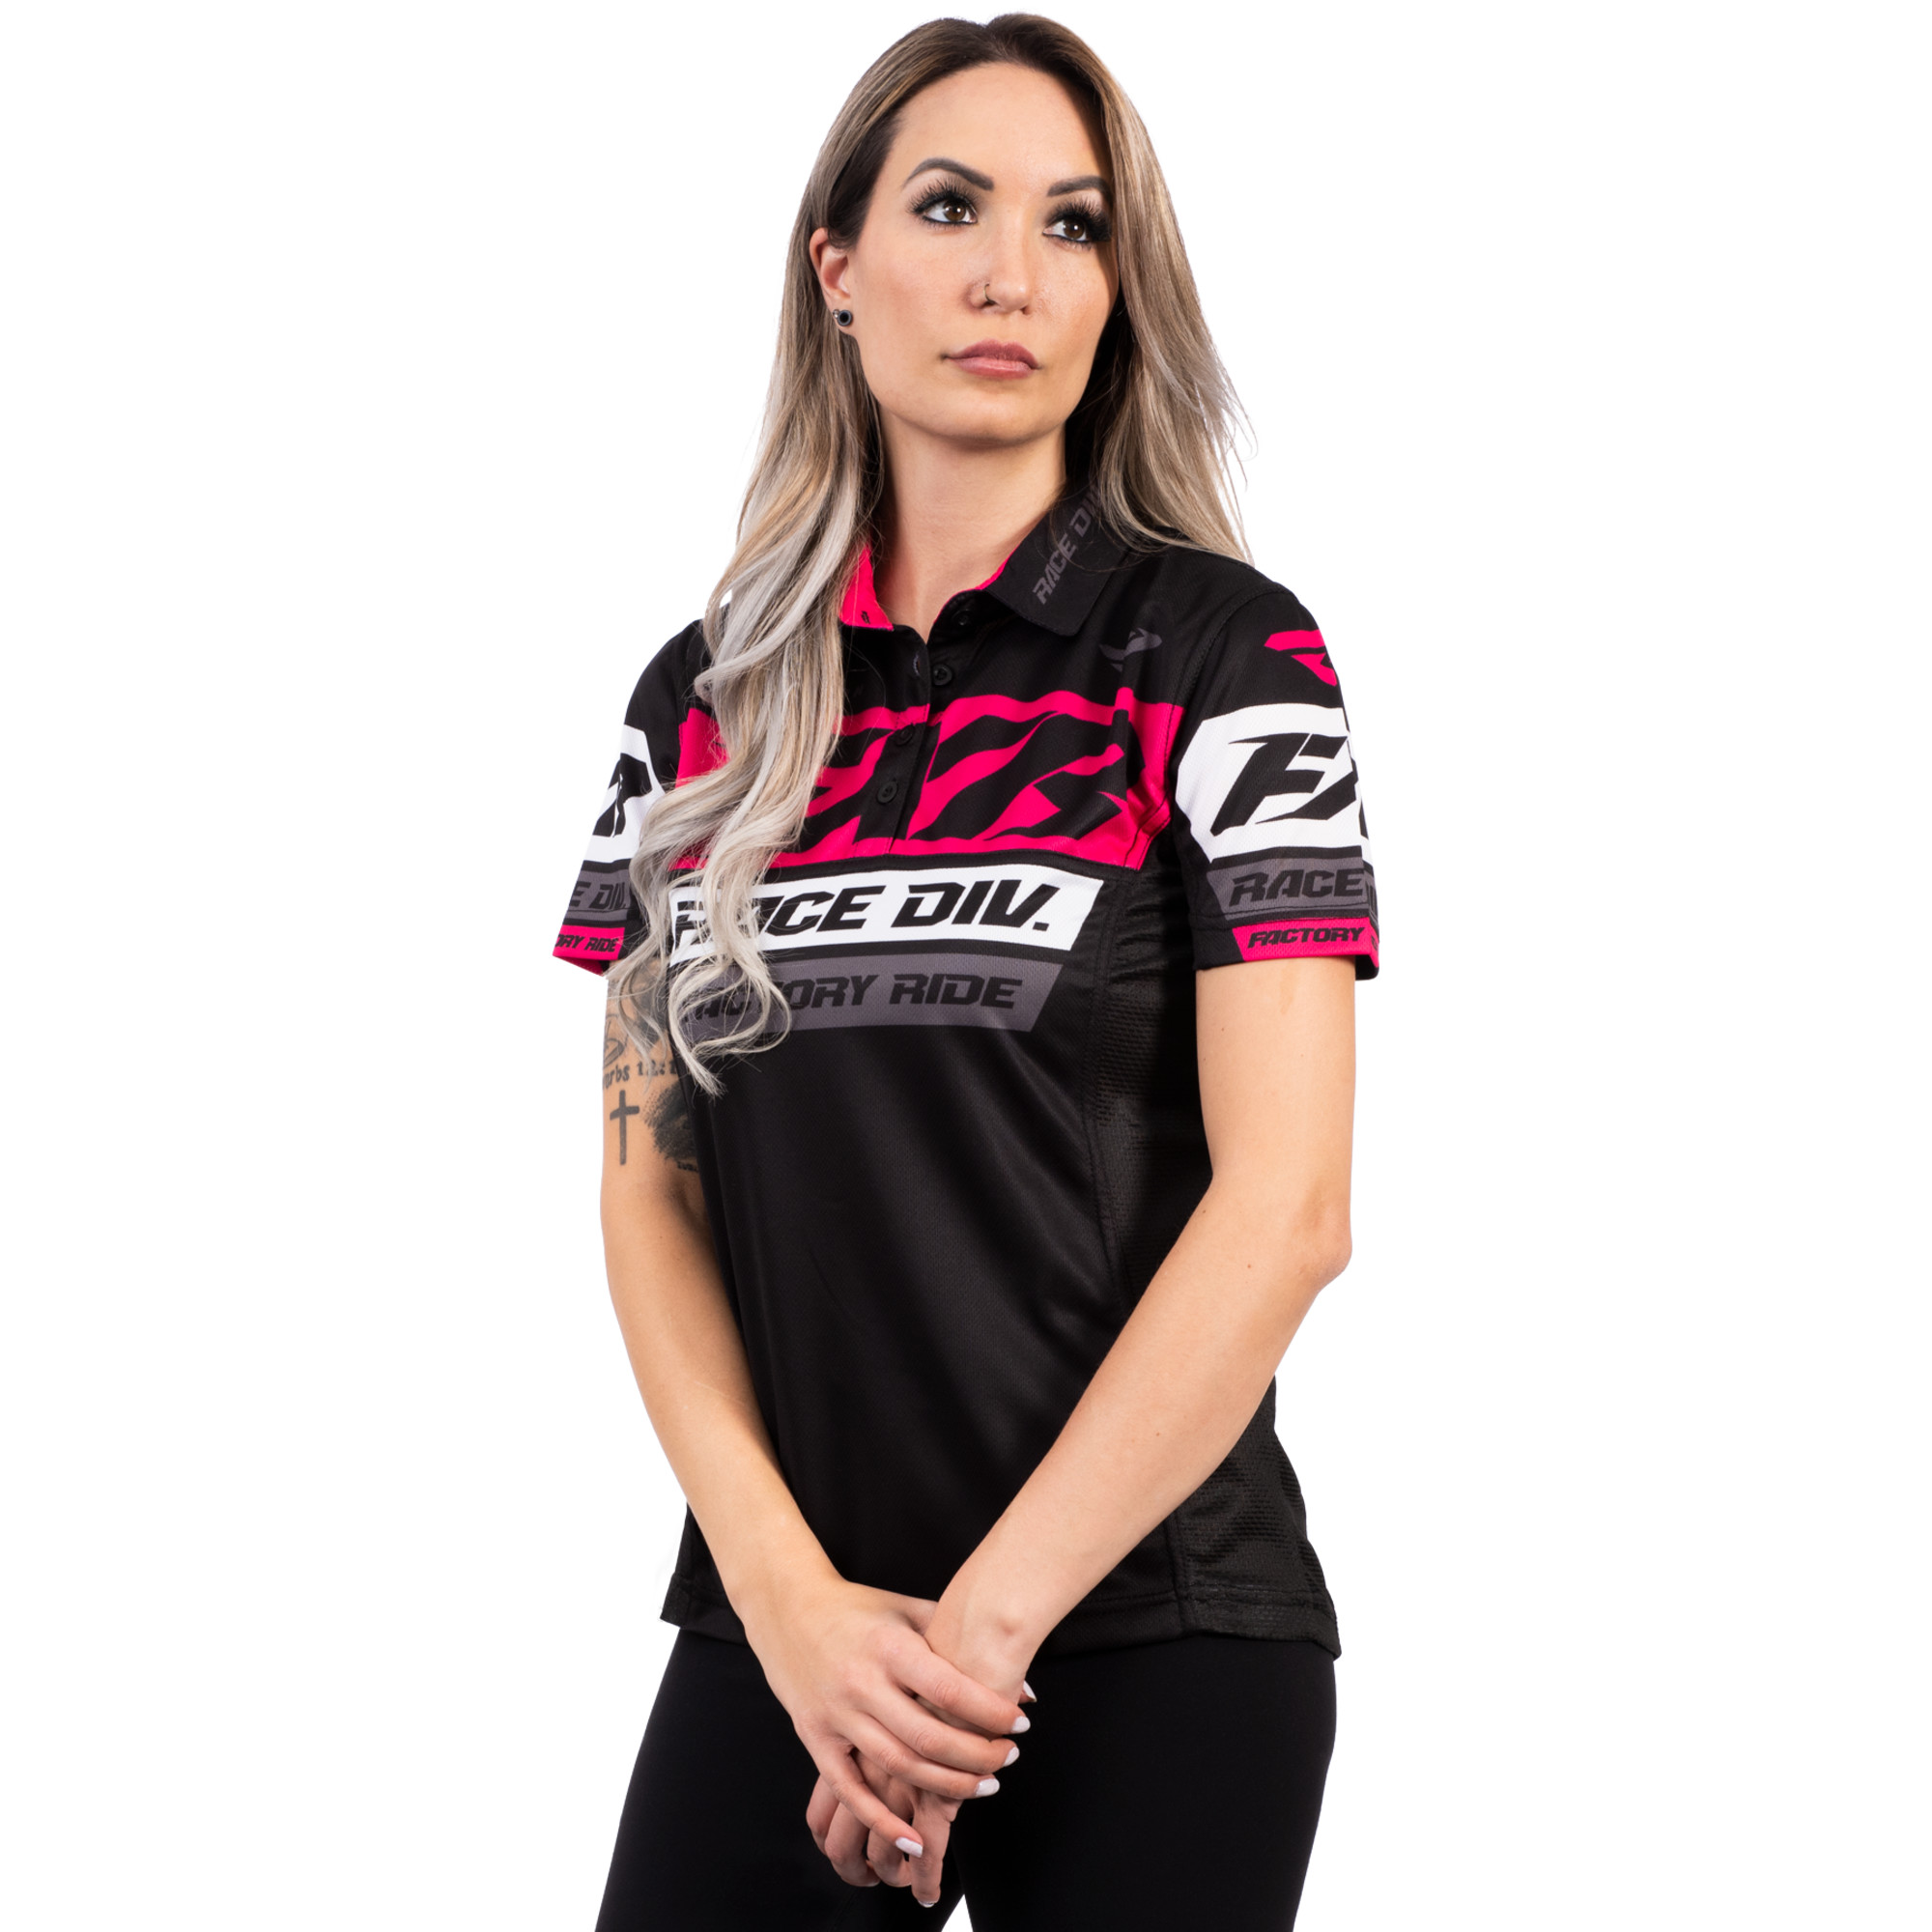 fxr racing t-shirt shirts for womens race division polo